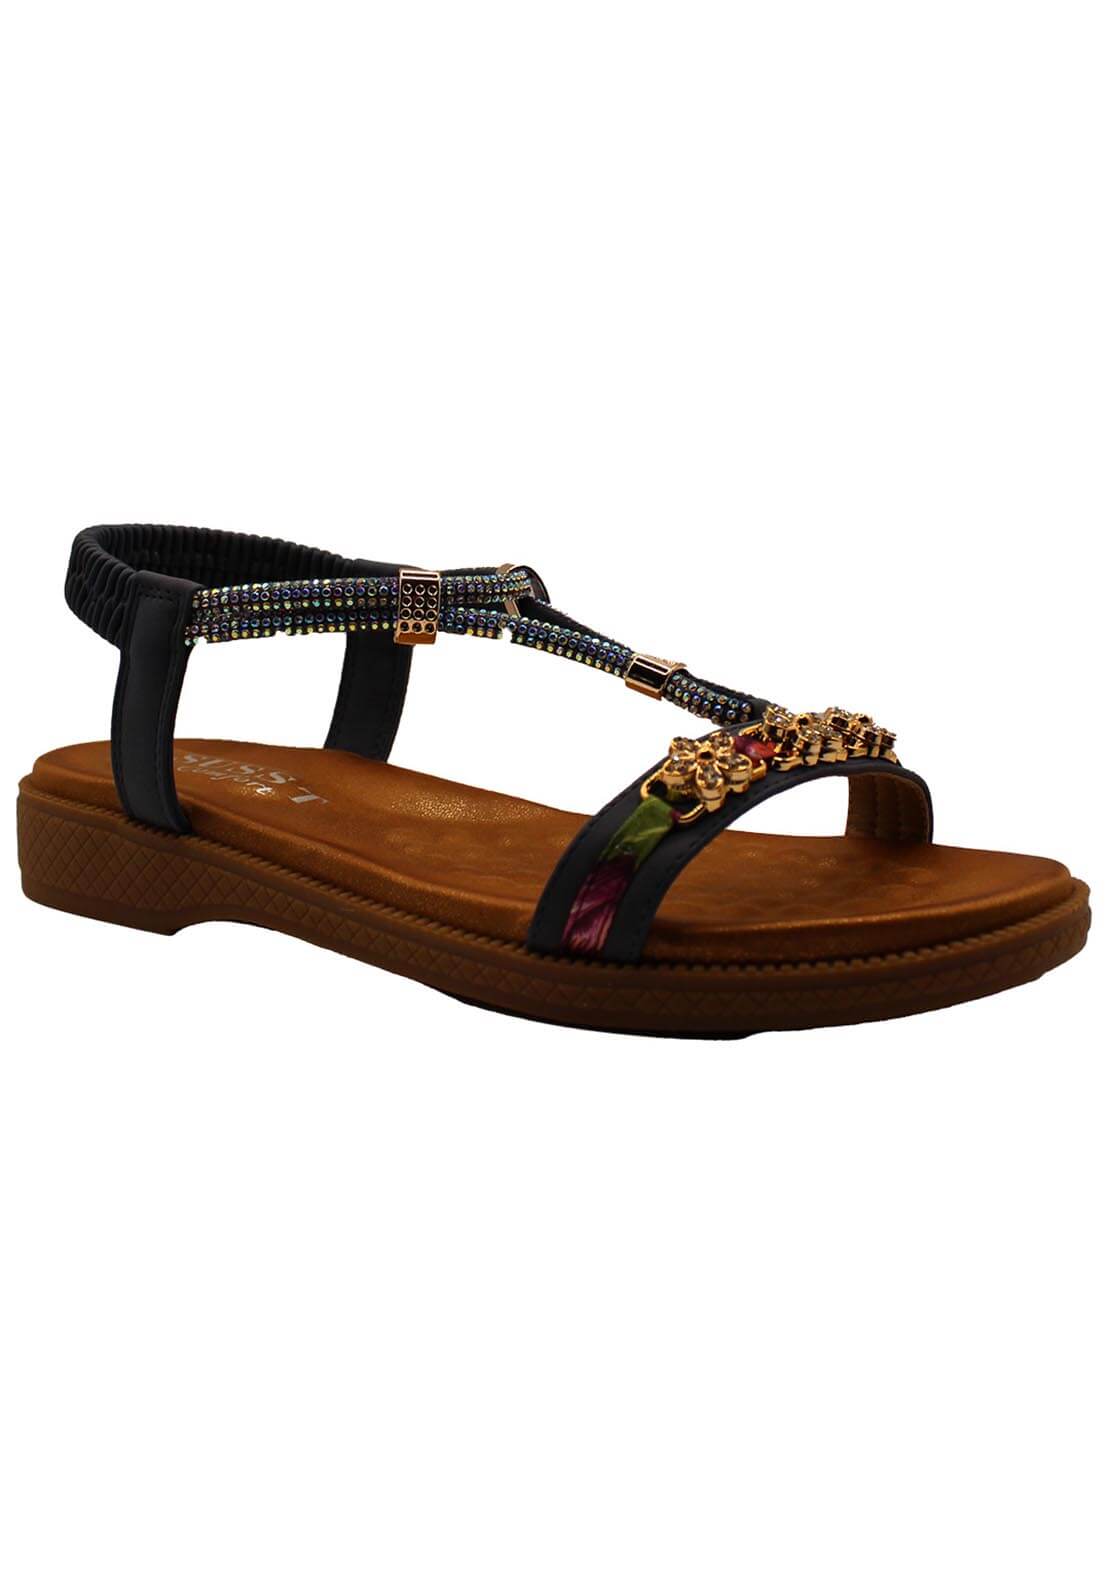 Susst Elastic Strap Comfortable Sandal - Navy 1 Shaws Department Stores